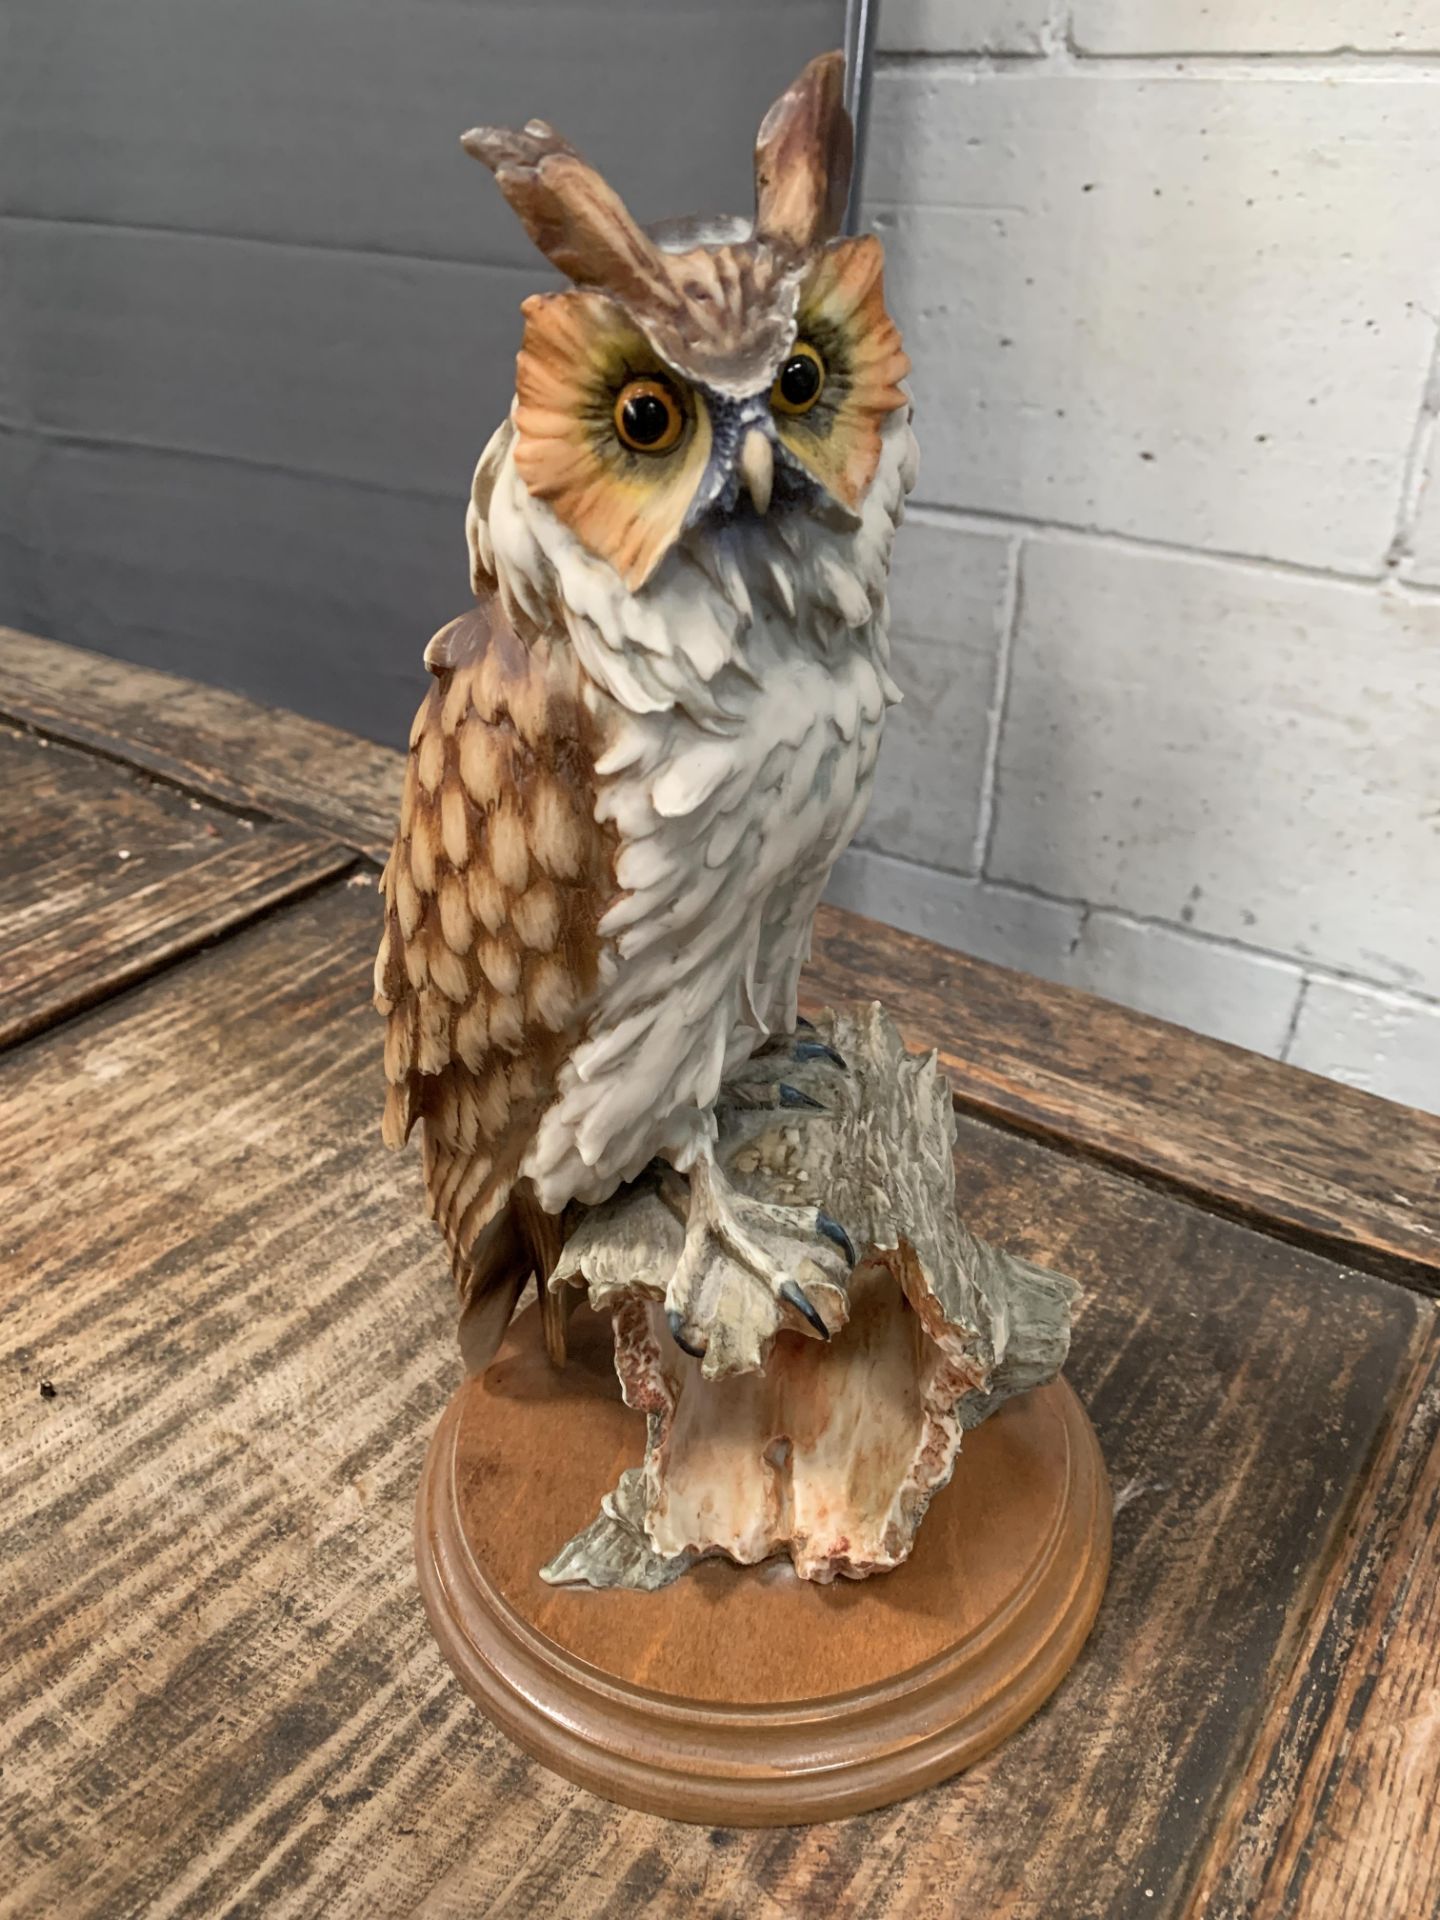 Resin model of an owl on wooden base, signed by artist